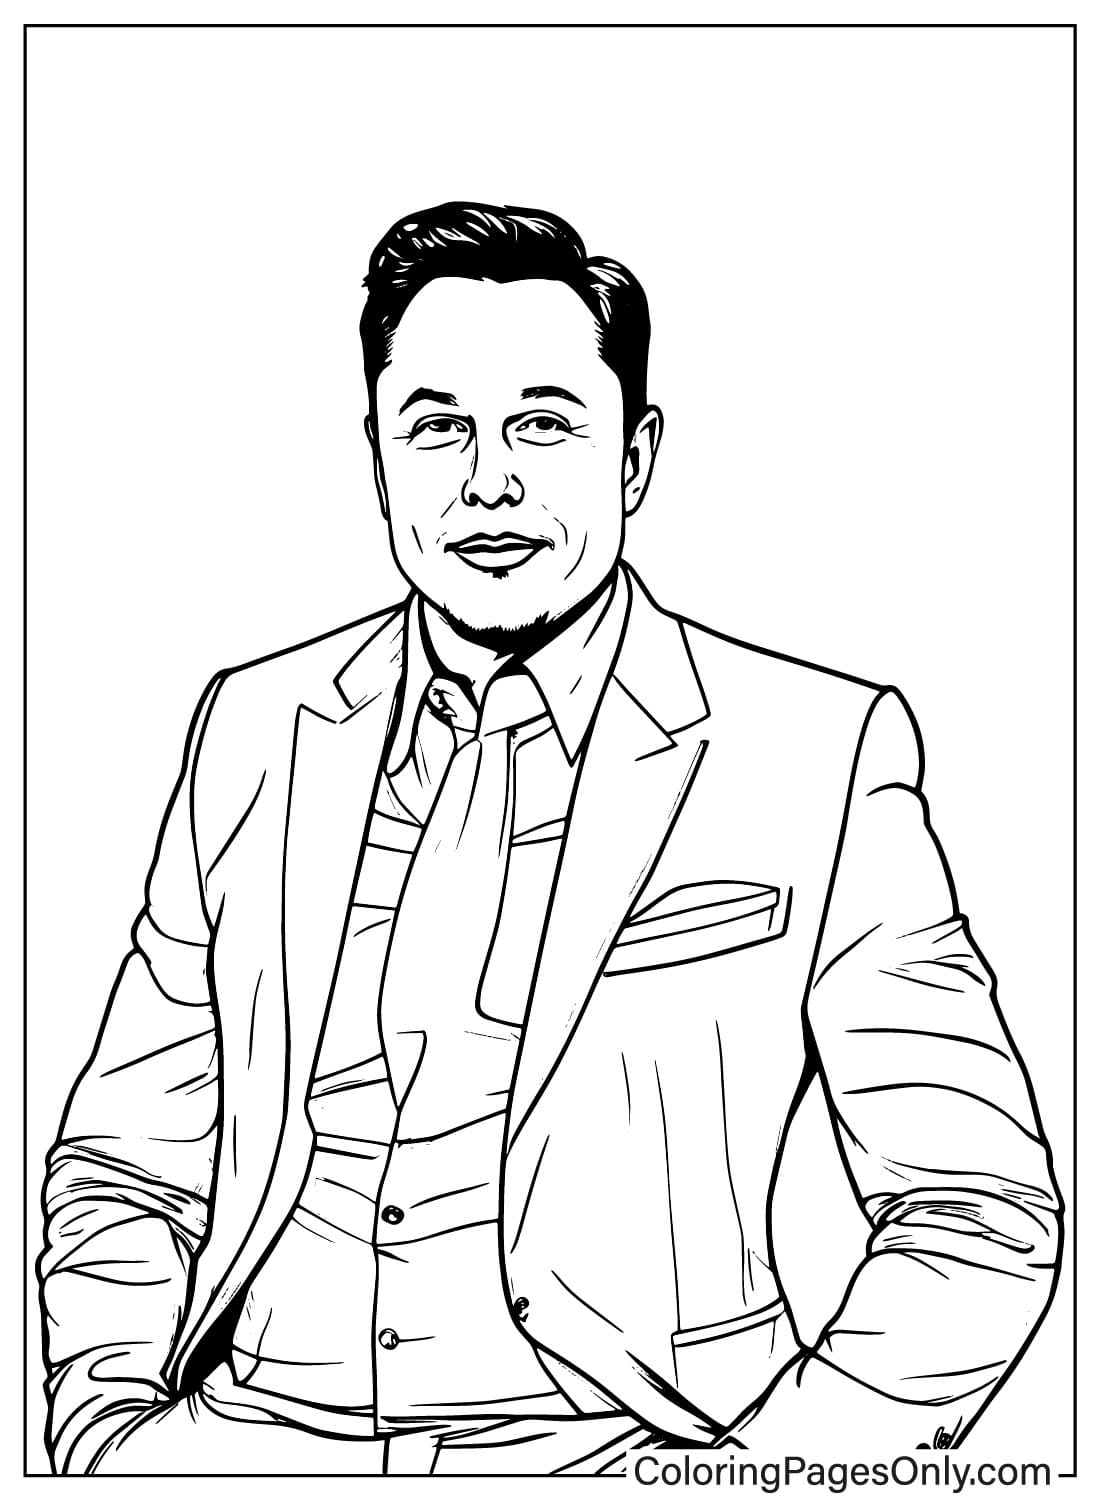 Elon Musk Images Coloring Page